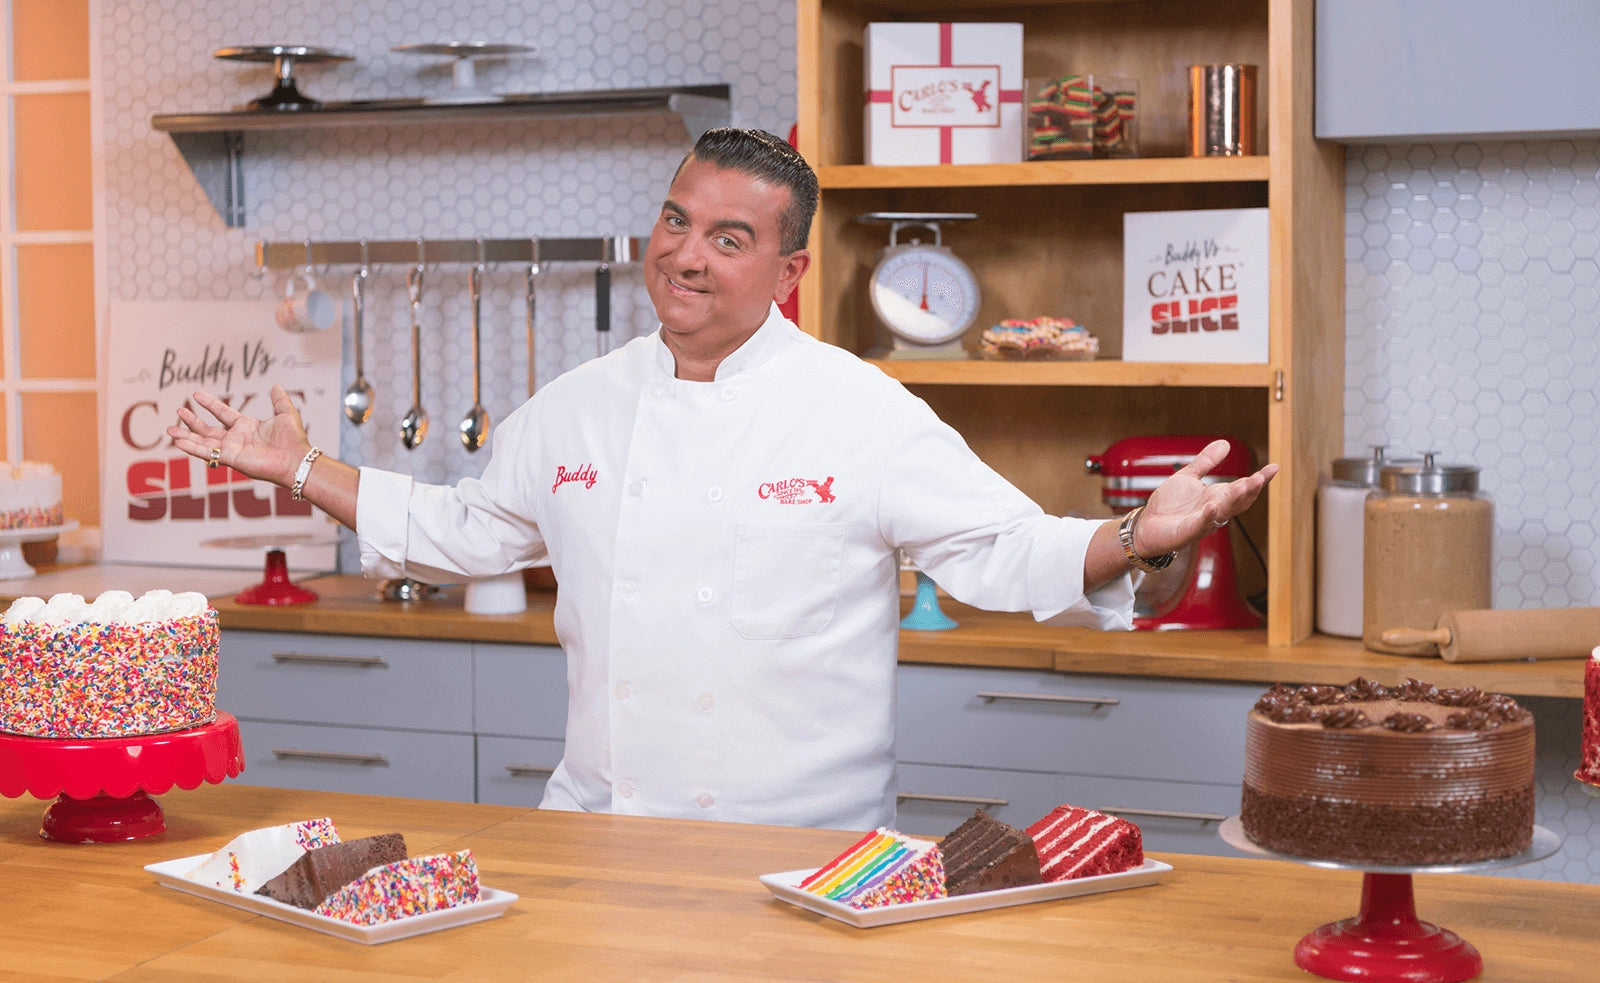 Cake Boss' Now: Buddy Valastro on Kids Taking Over Carlo's Bakery  (EXCLUSIVE)